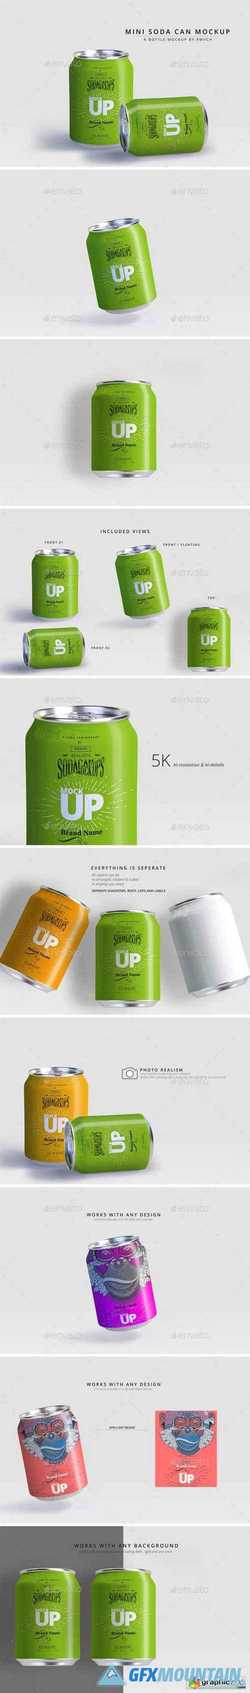 Mini Can Mockup Food and Drink 22613518